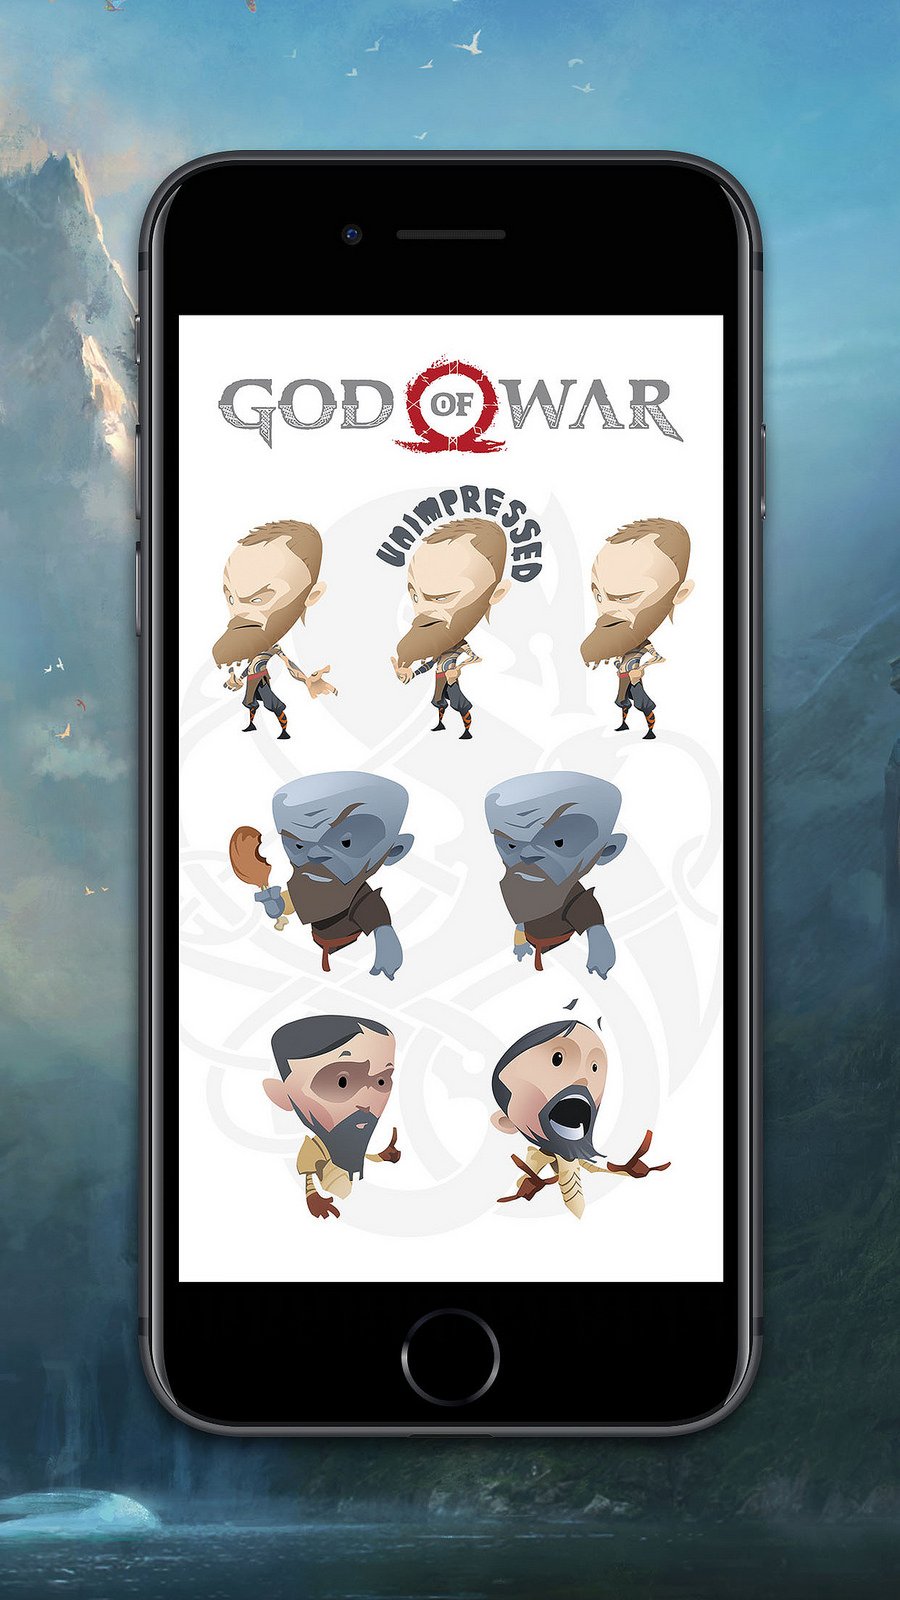 God-of-War-stickers-mobiles-05-09-05-2018